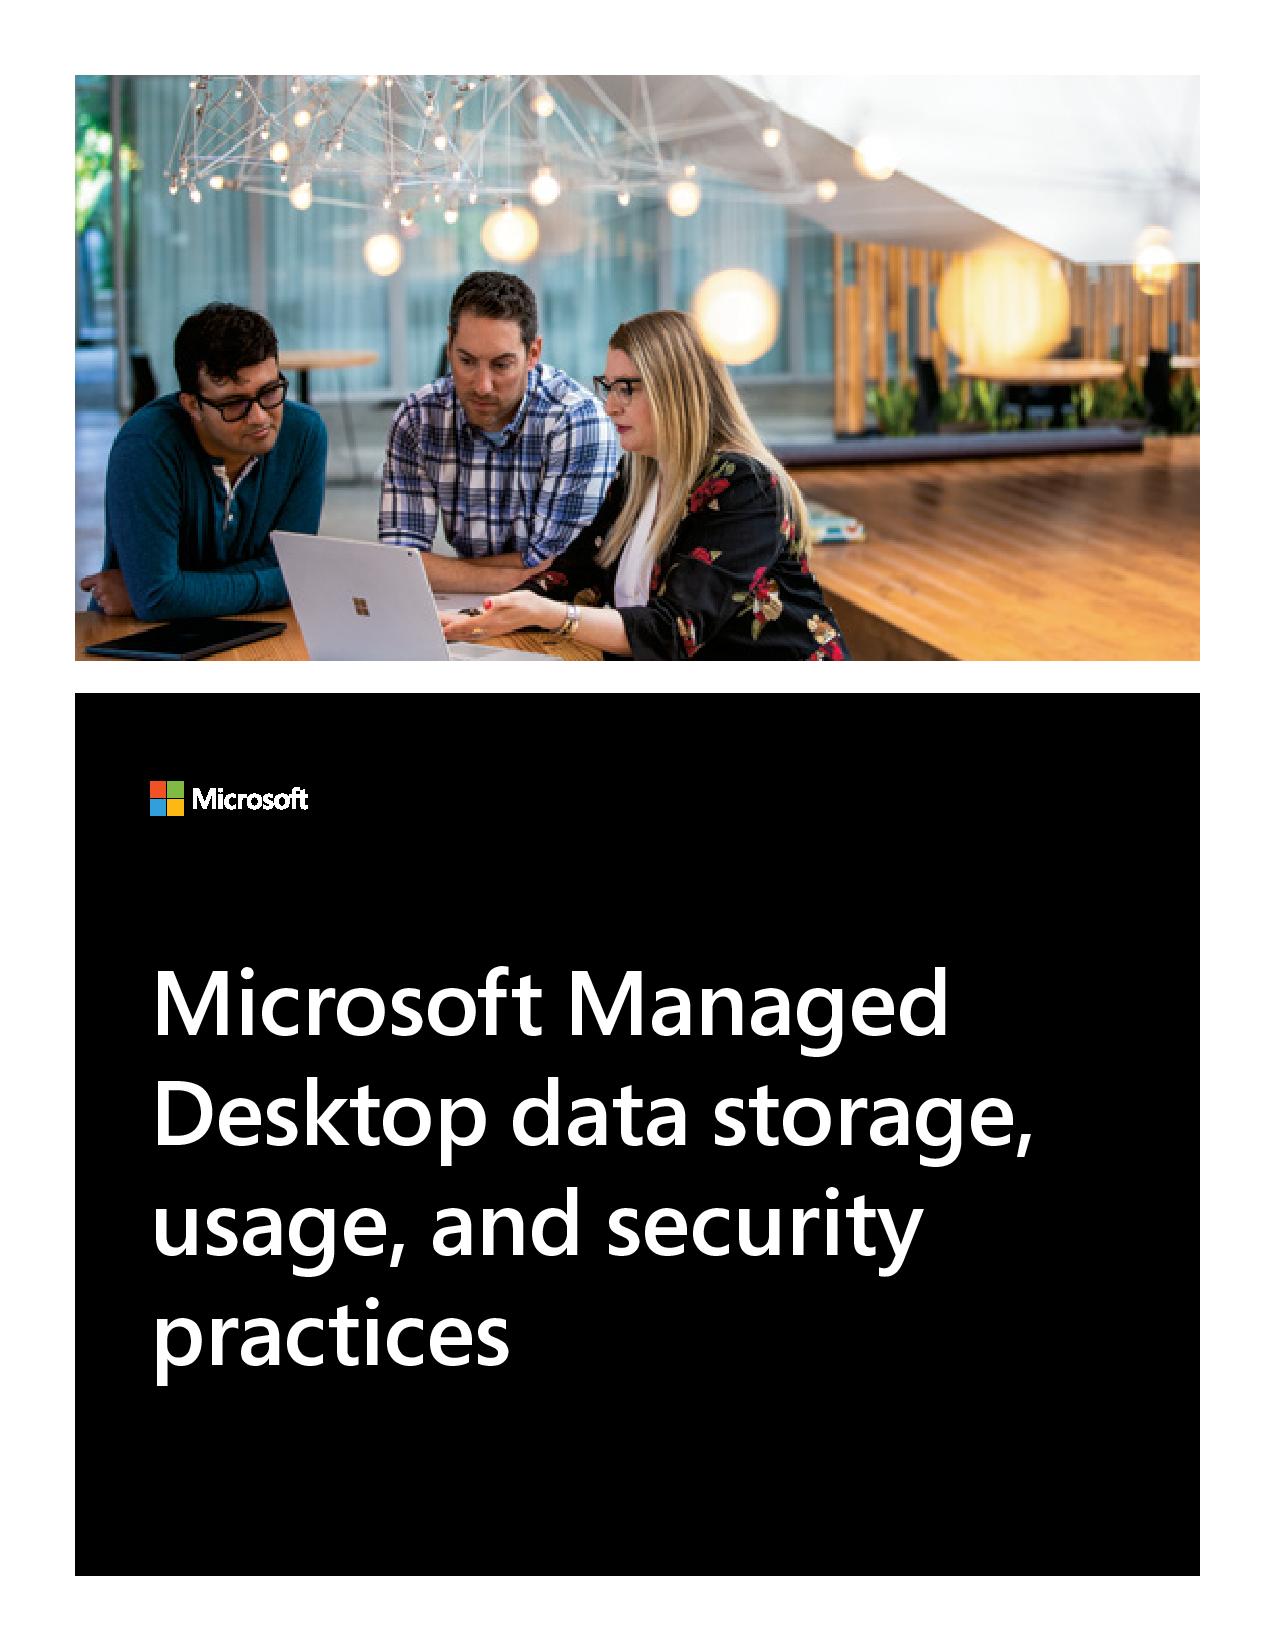 Microsoft Managed Desktop - data storage, usage, and security practices